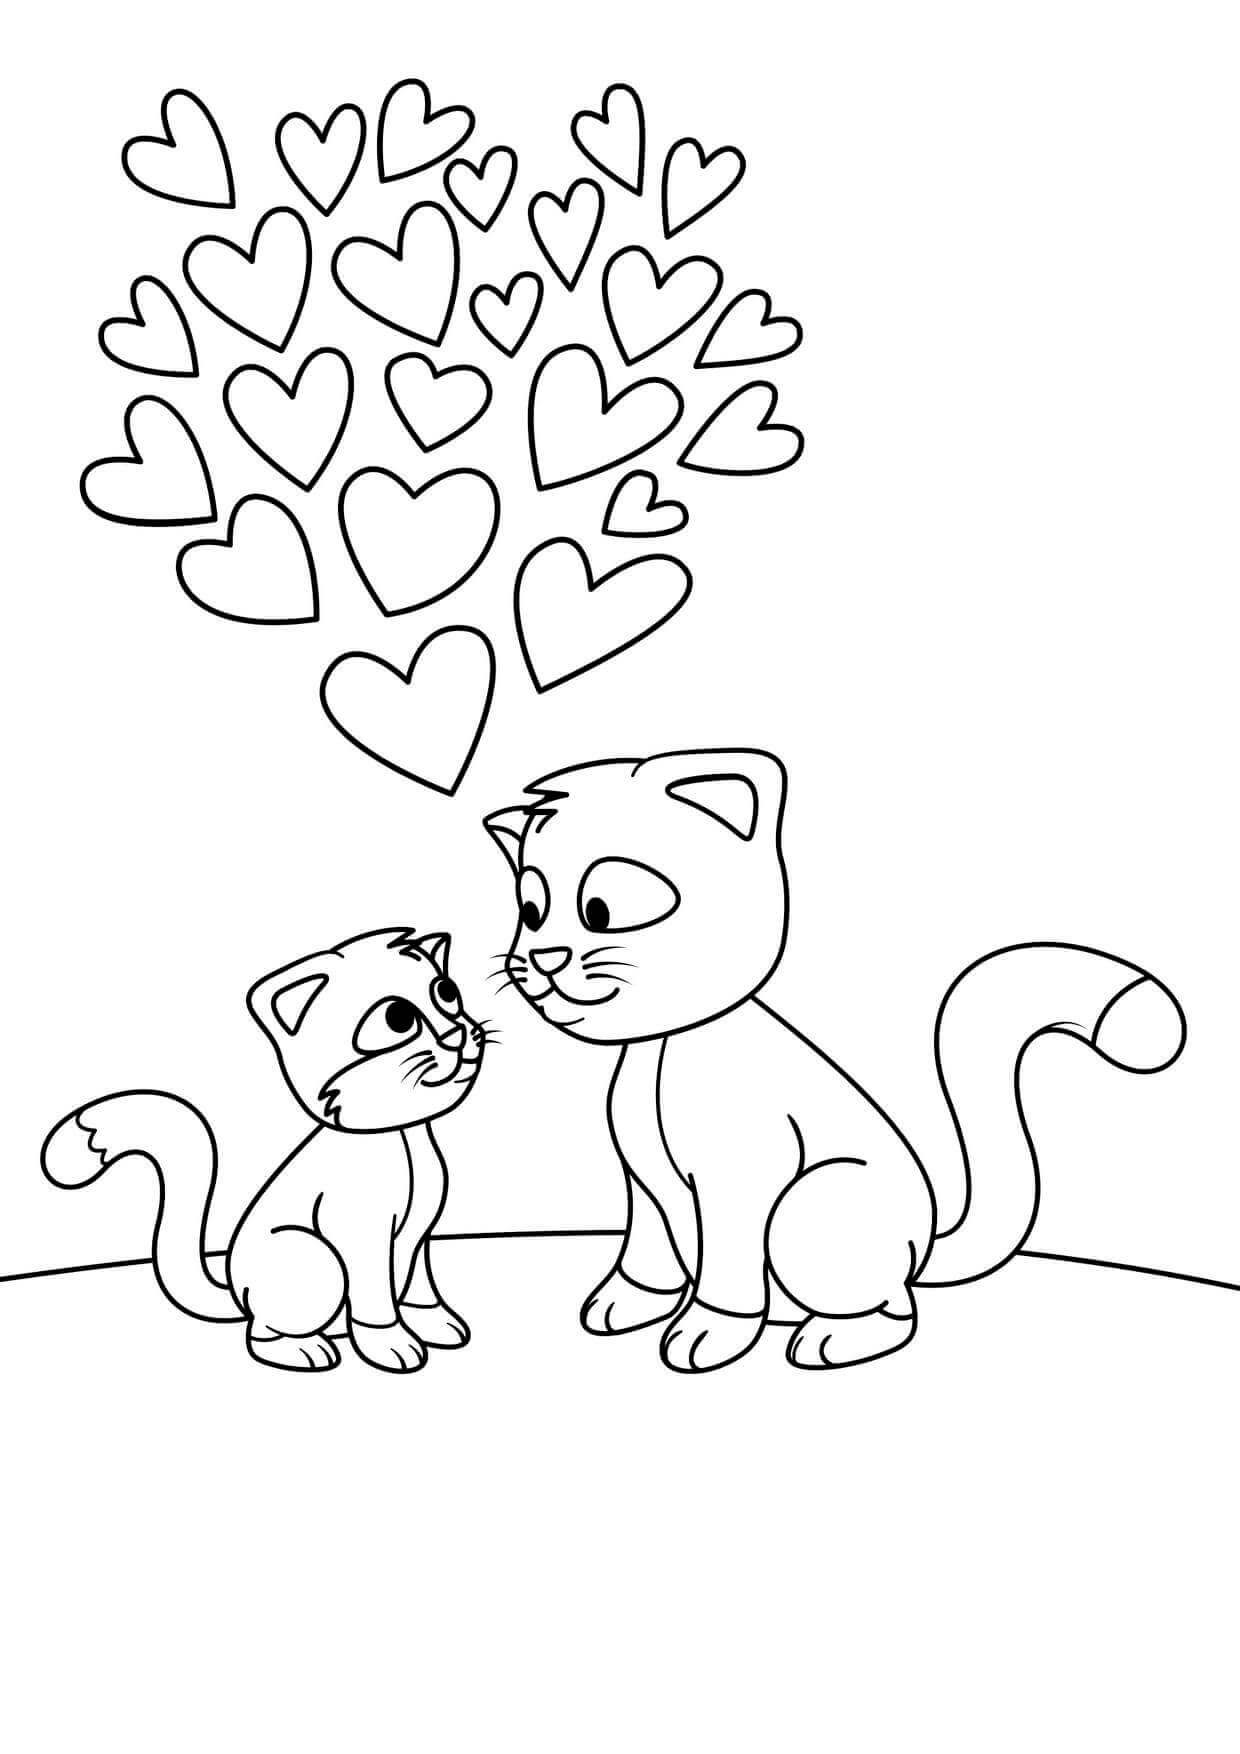 Fun Coloring Pages For Girls
 Free Printable Coloring Pages For Girls